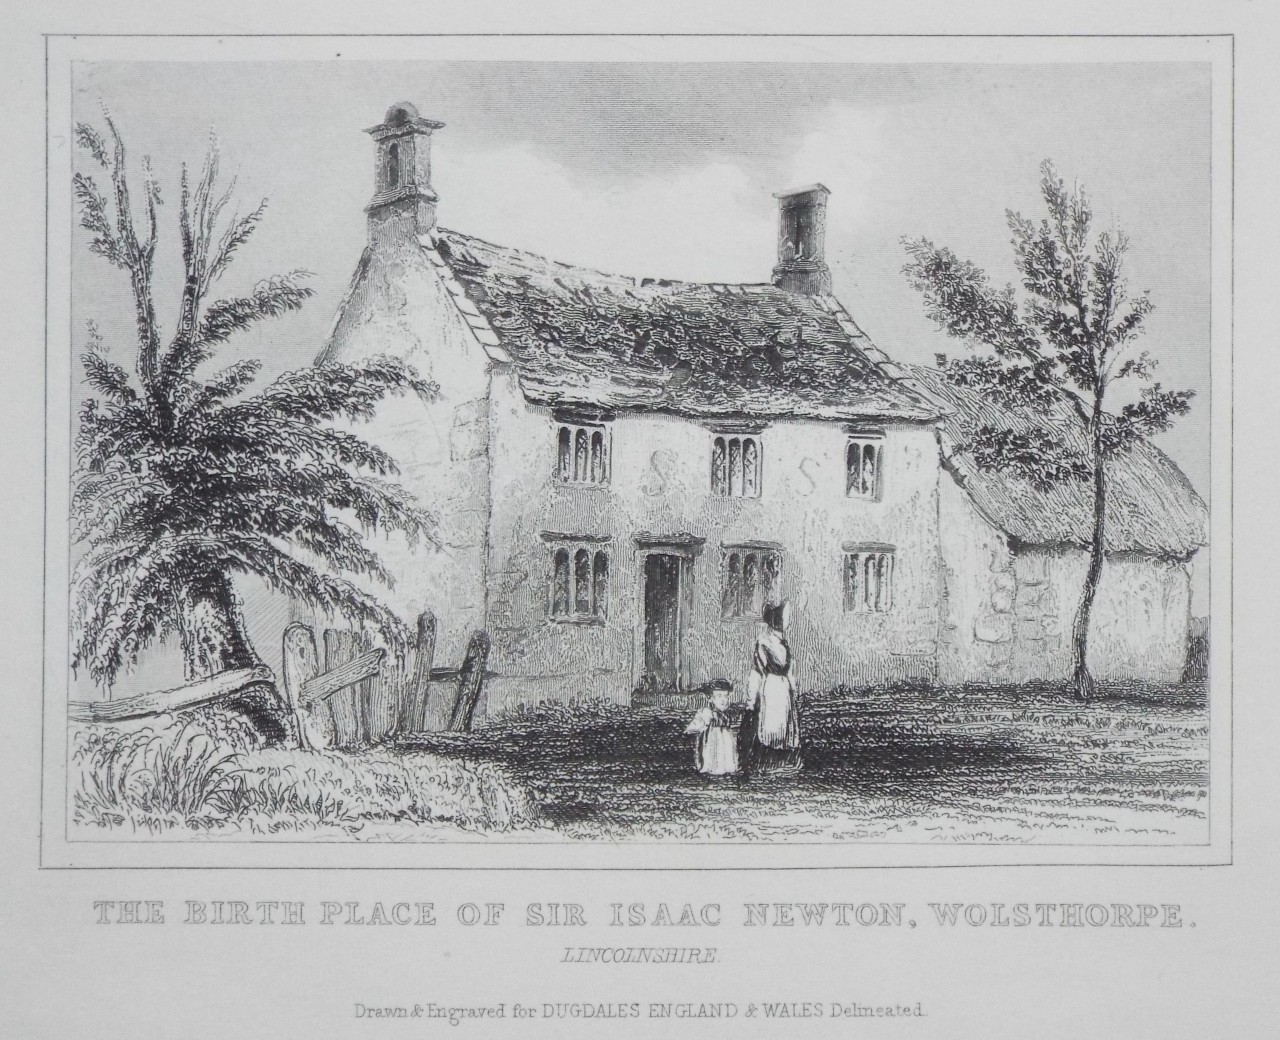 Print - The Birth Place of Sir Isaac Newton, Wolstthorpe. Lincolnshire.